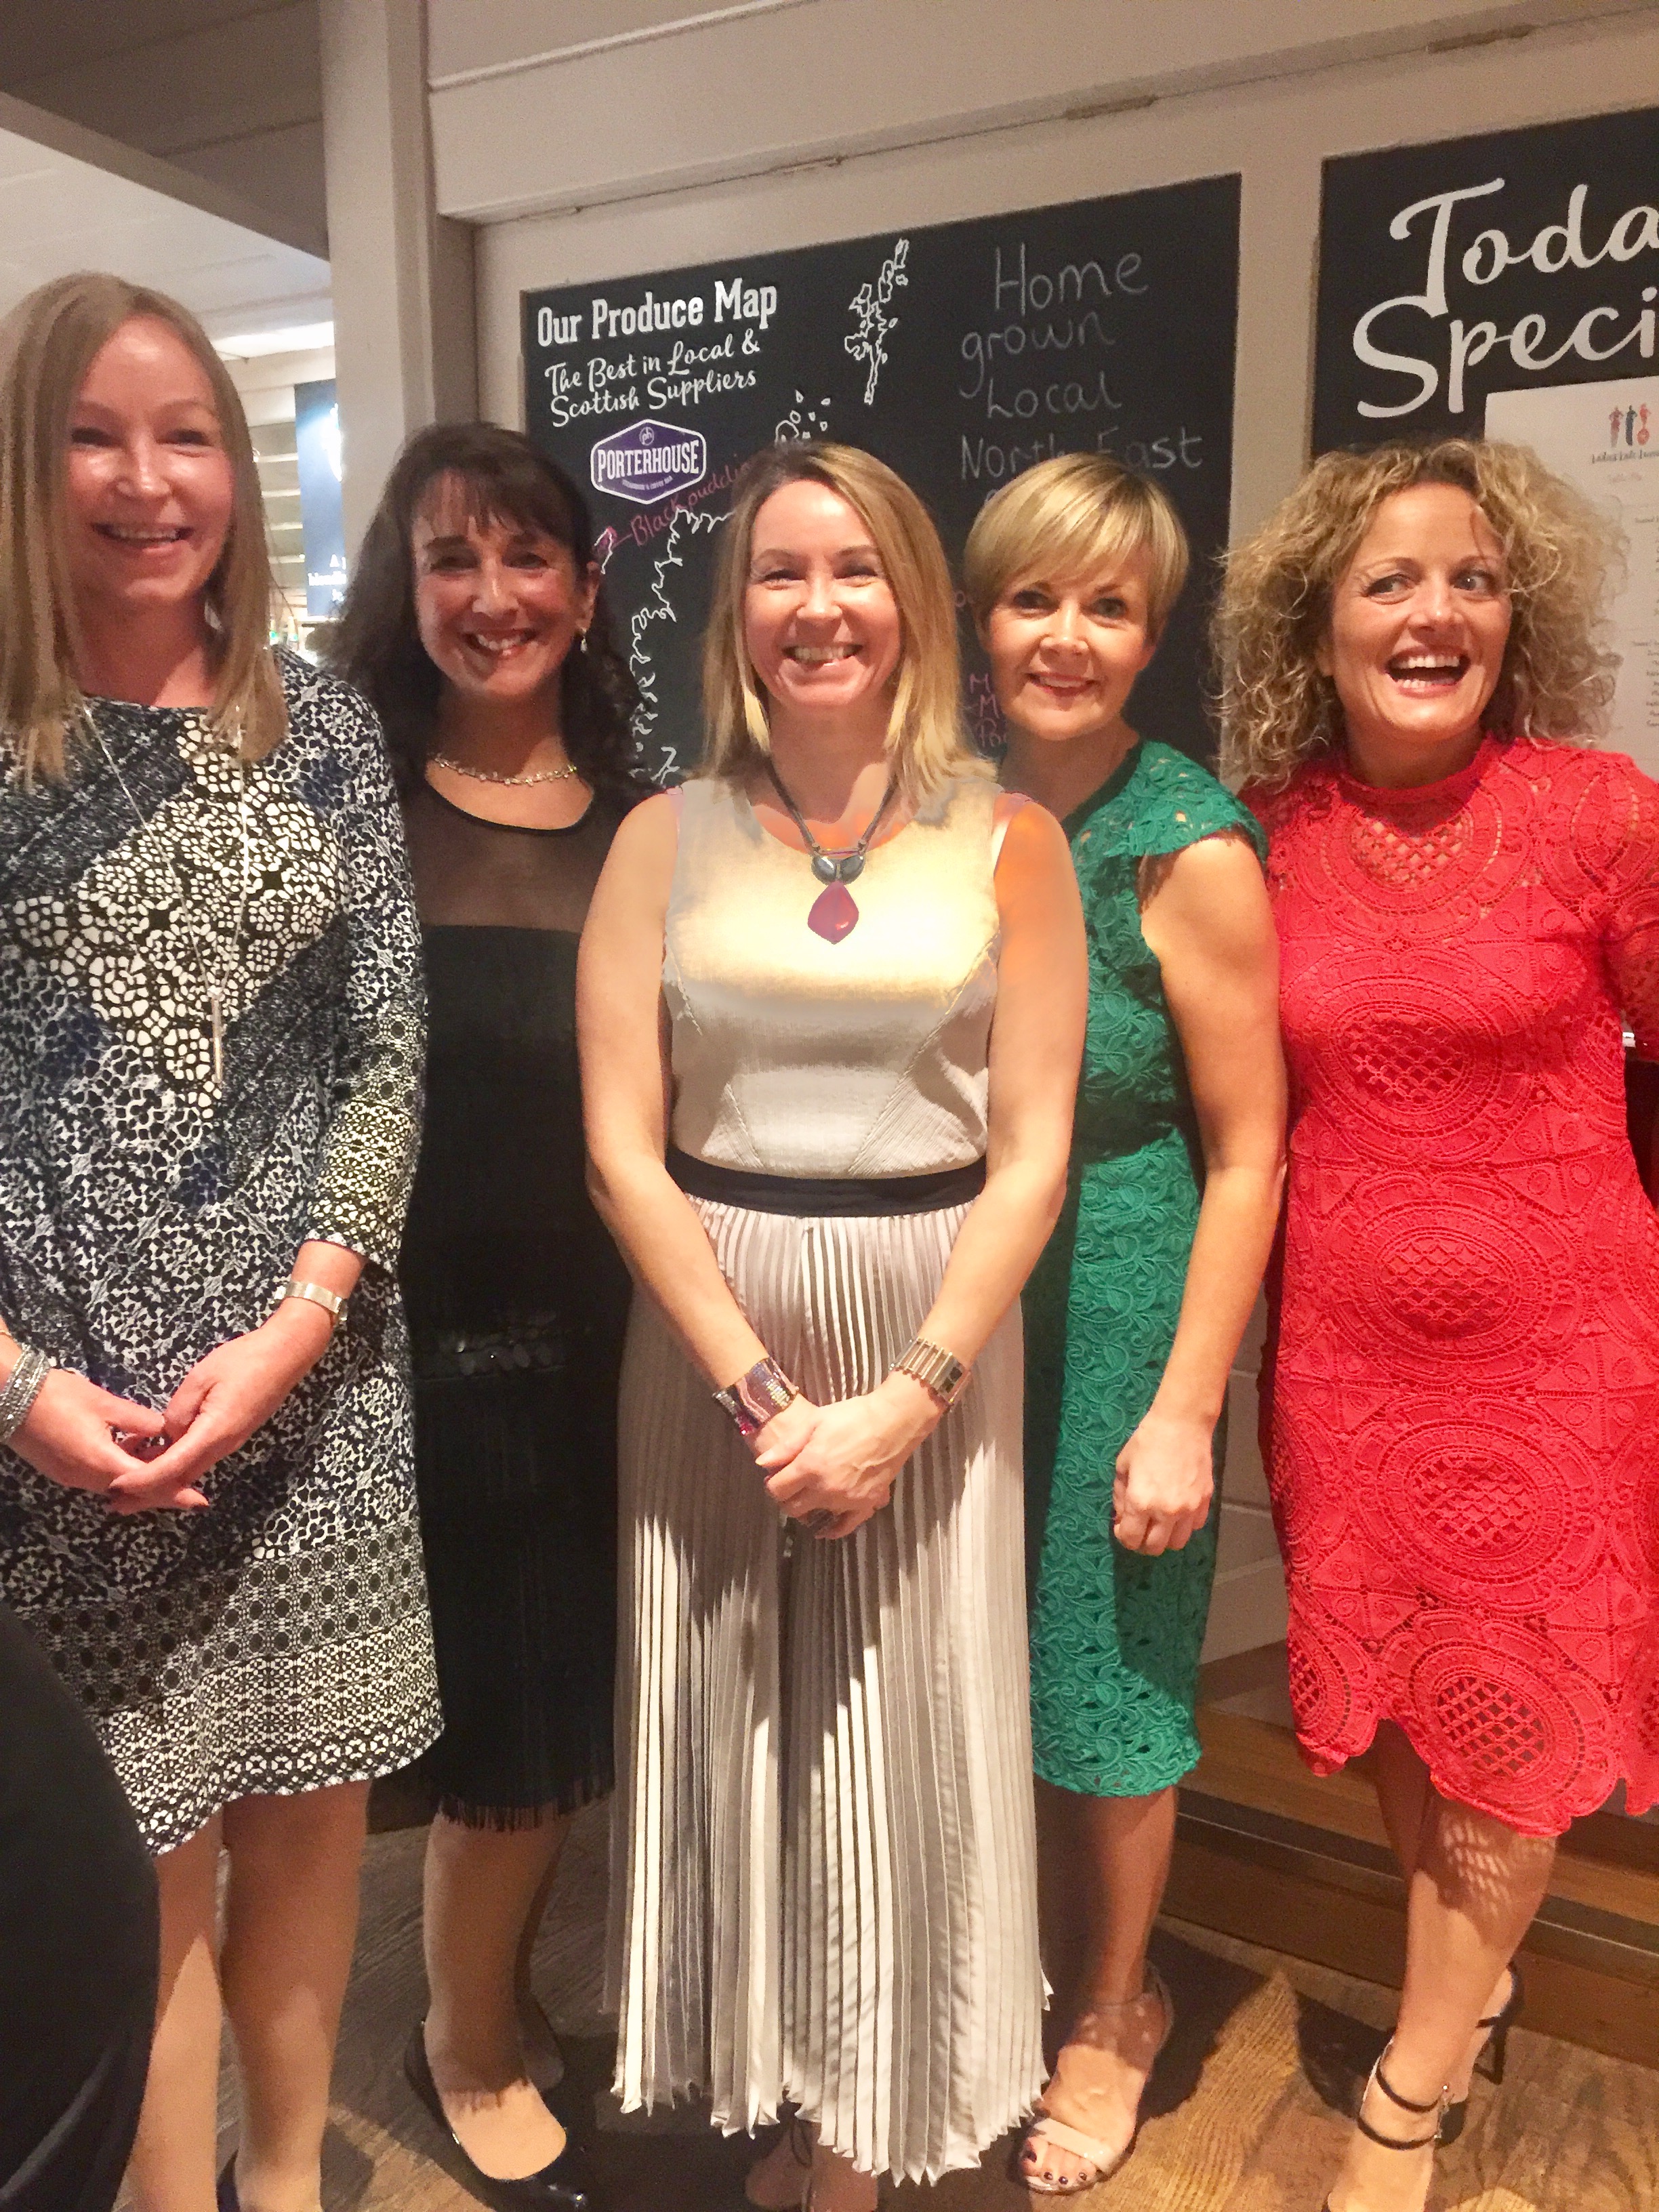 Ladies' Late Lunch fundraiser organisers